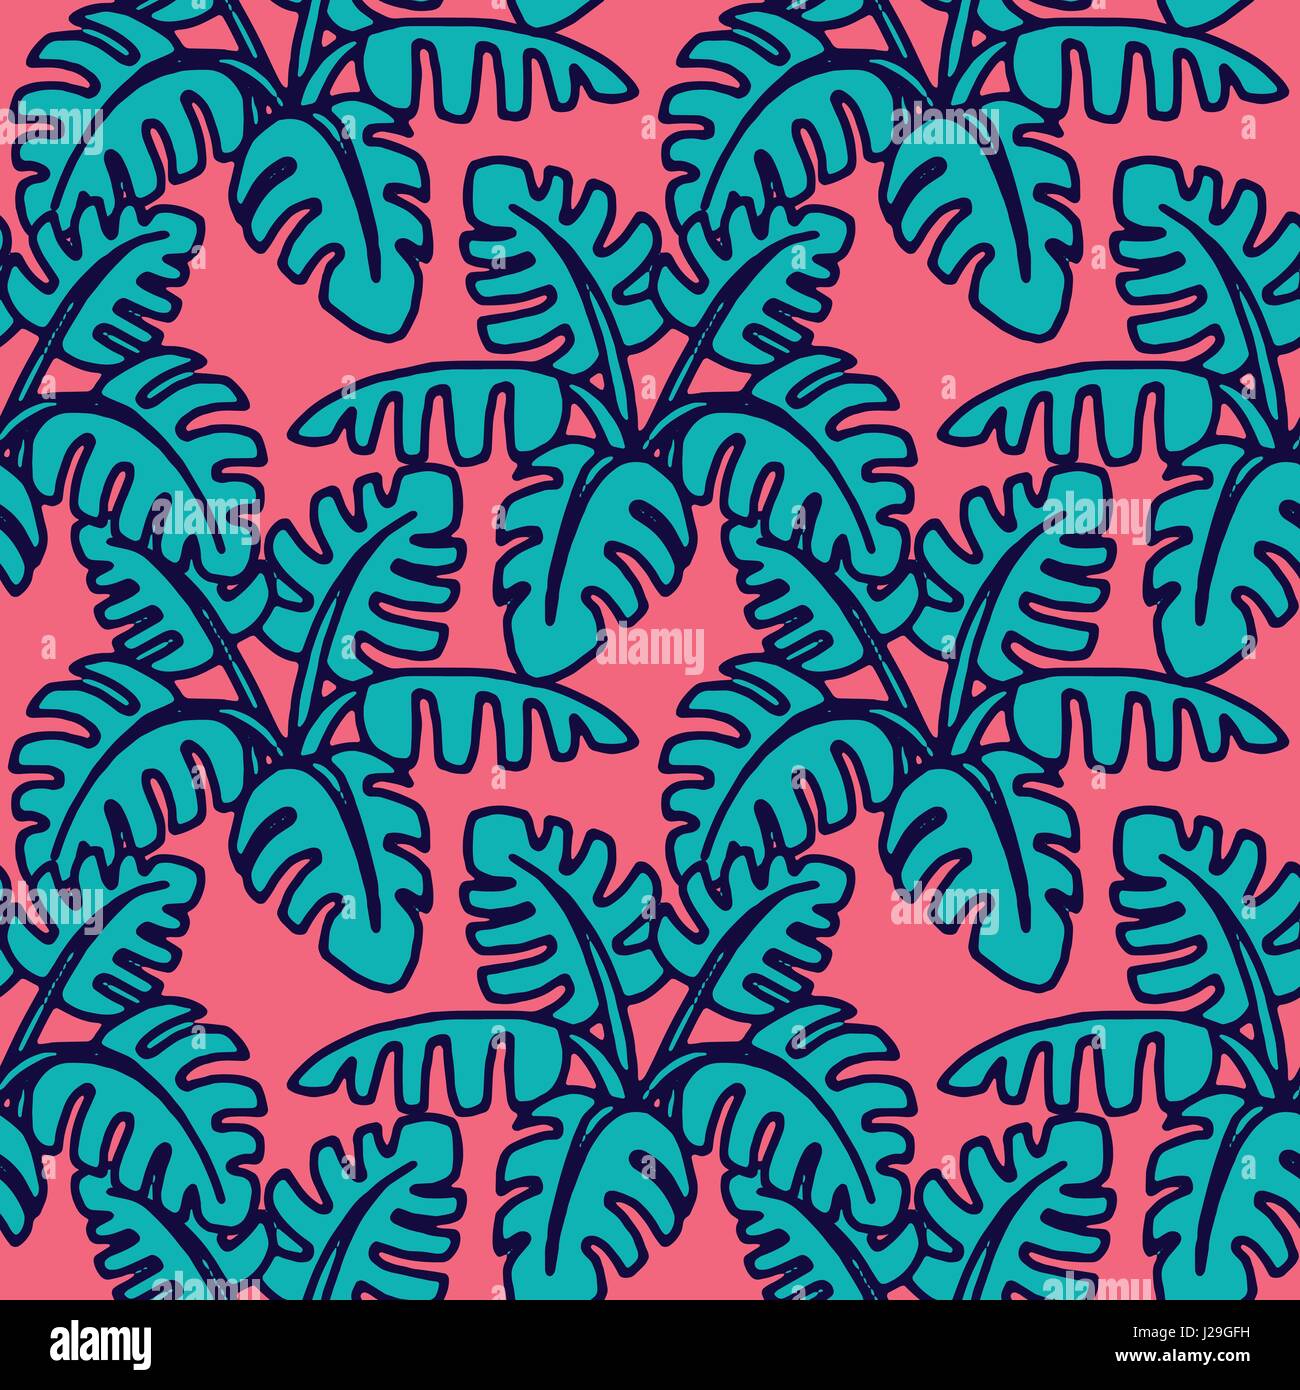 Seamless Tropical Jungle Palm Leaves Pattern. Stock Vector